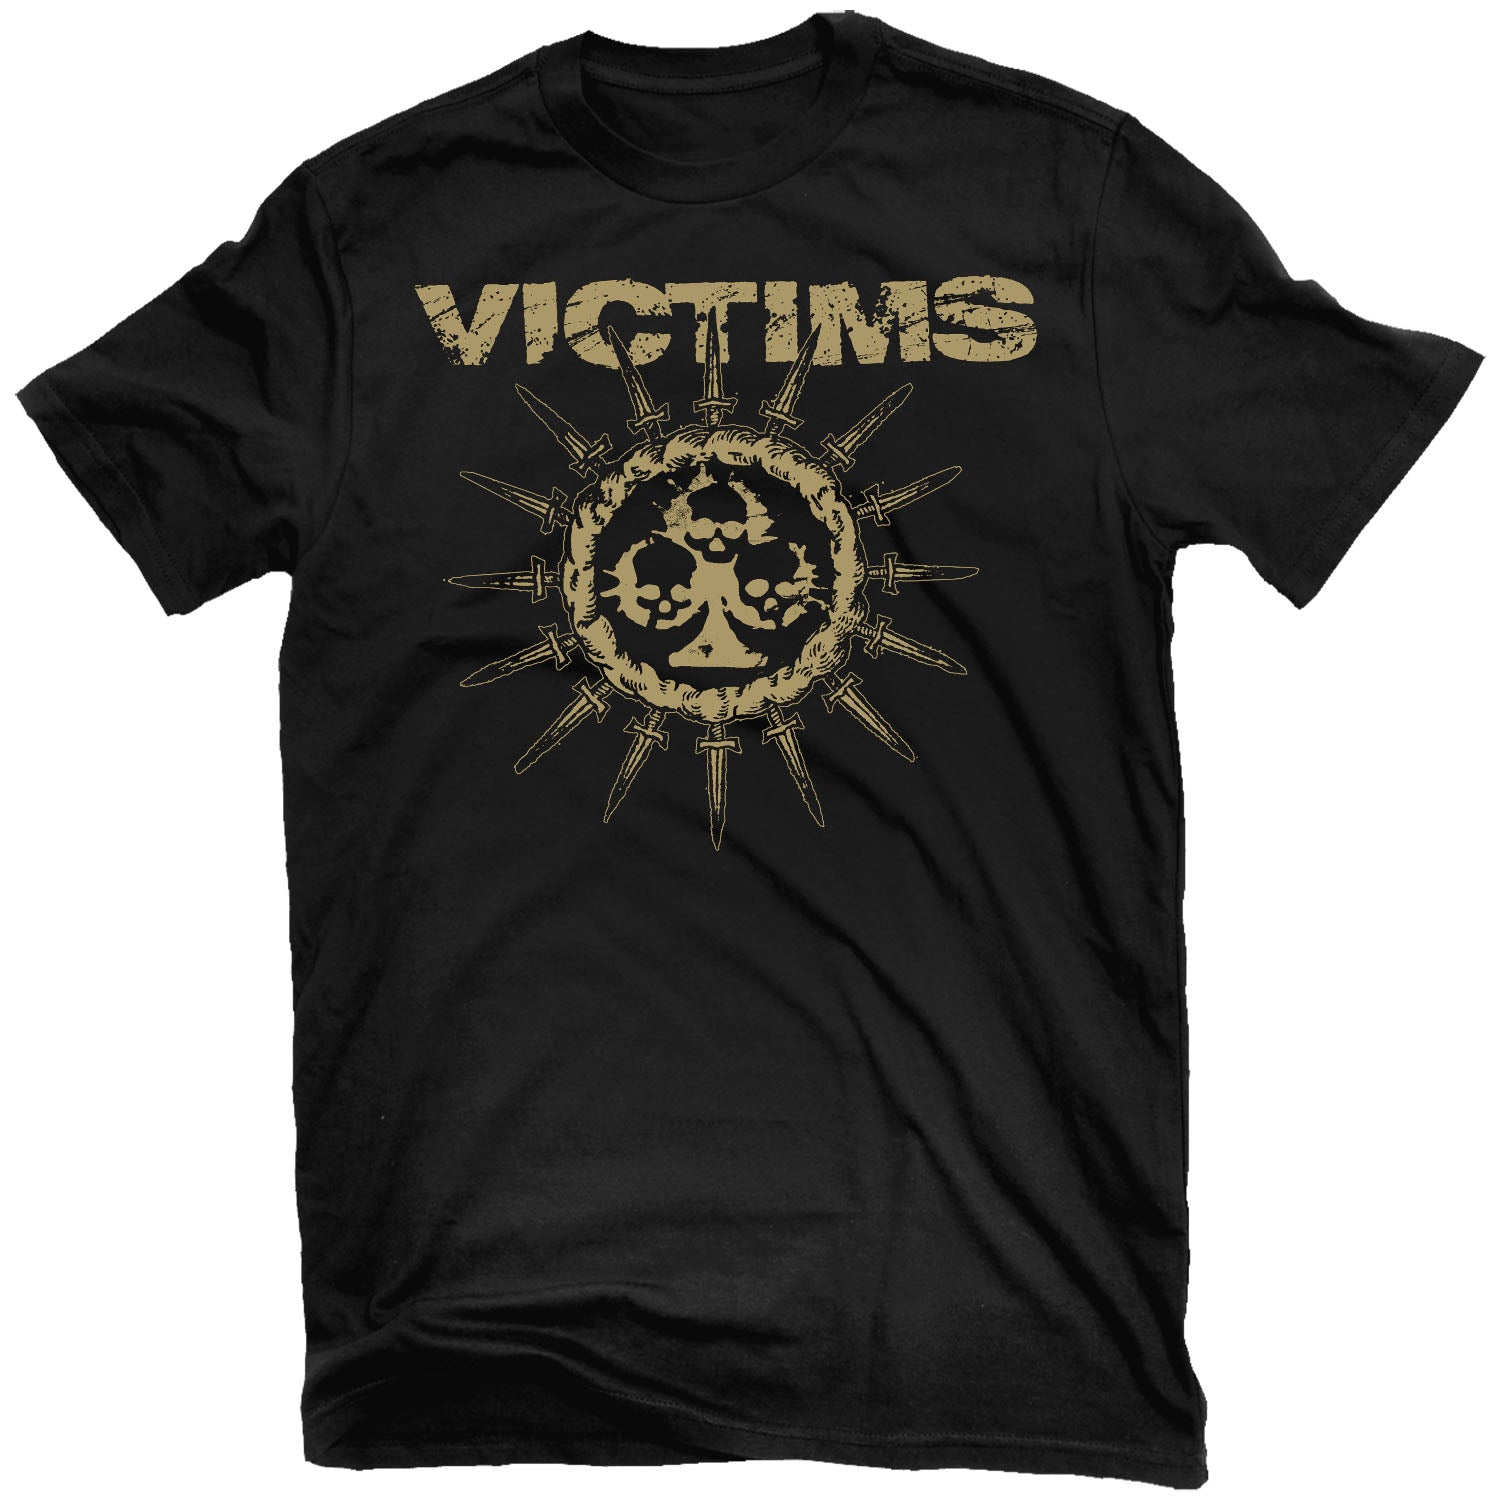 Victims "The Horse and Sparrow Theory" T-Shirt